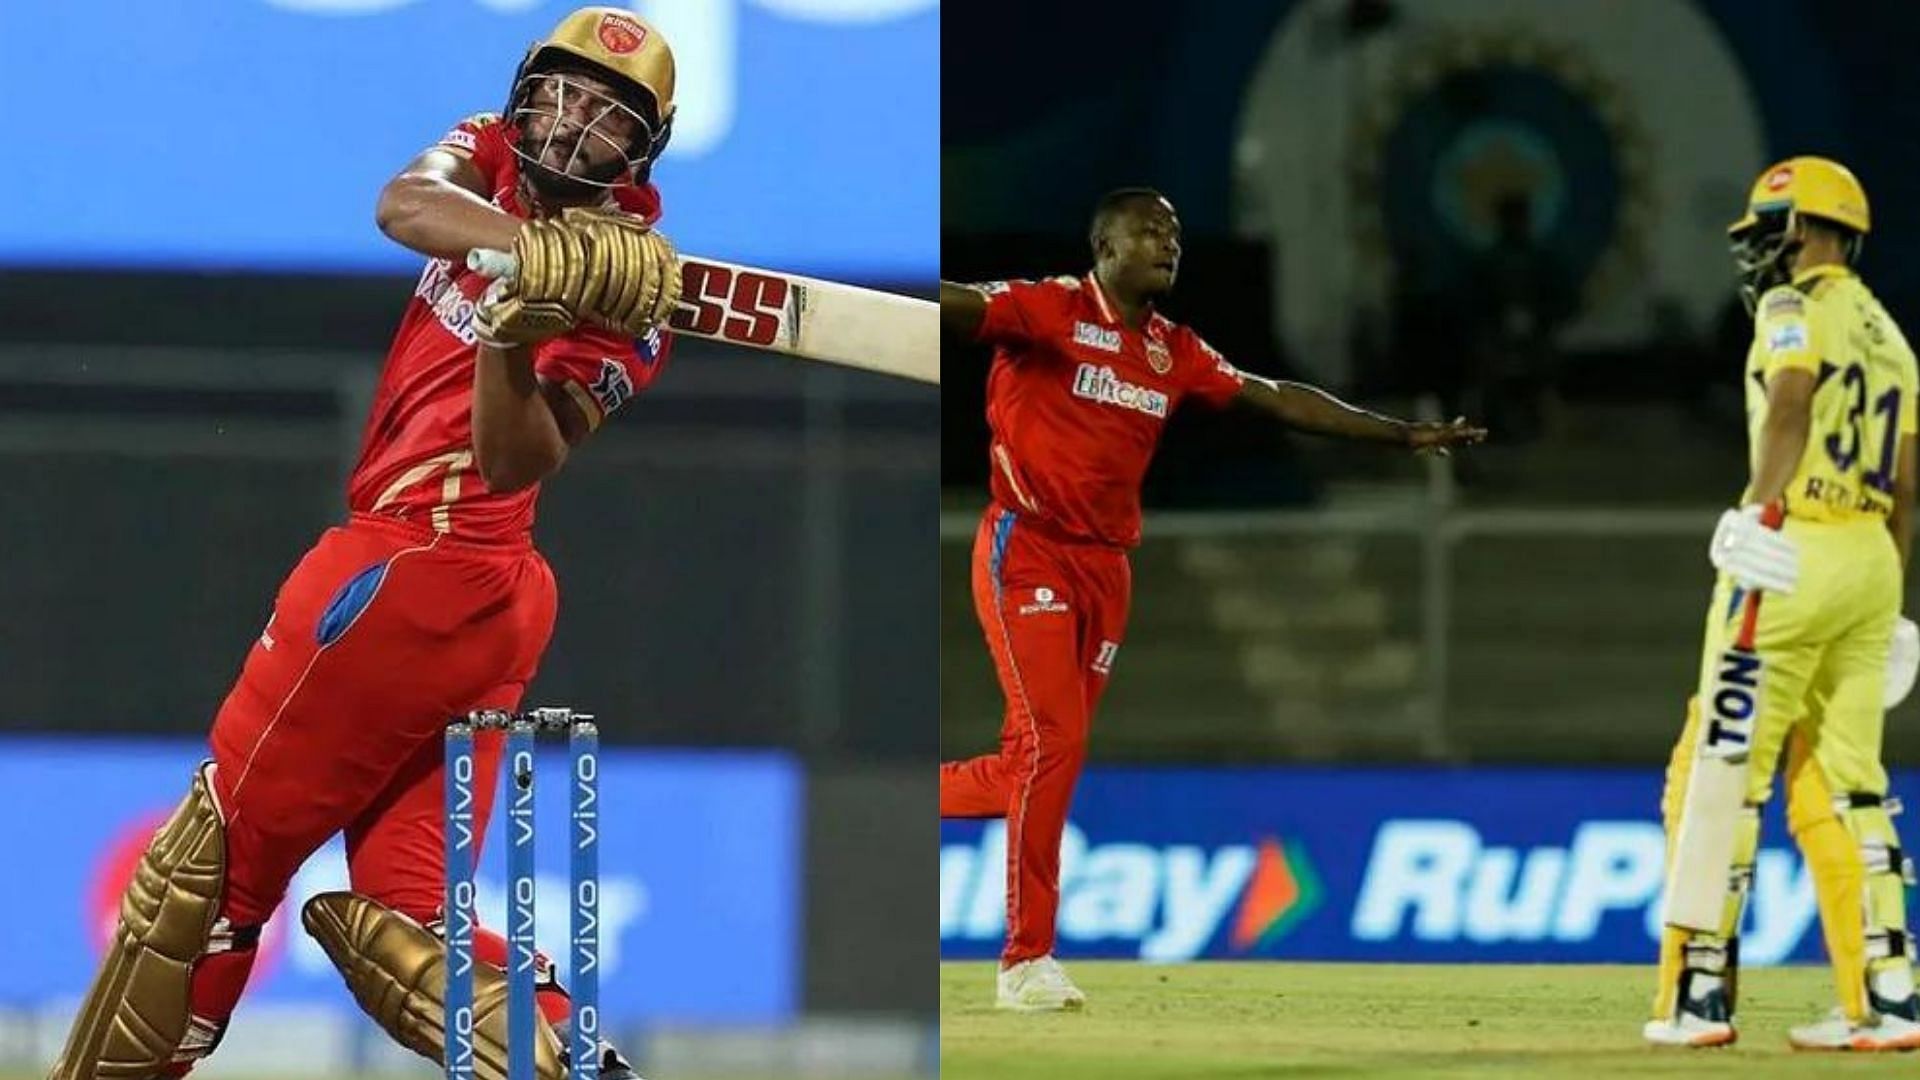 Shahrukh Khan (L) and Kagiso Rabada could be potential match-winners for PBKS. (P.C.:iplt20.com)